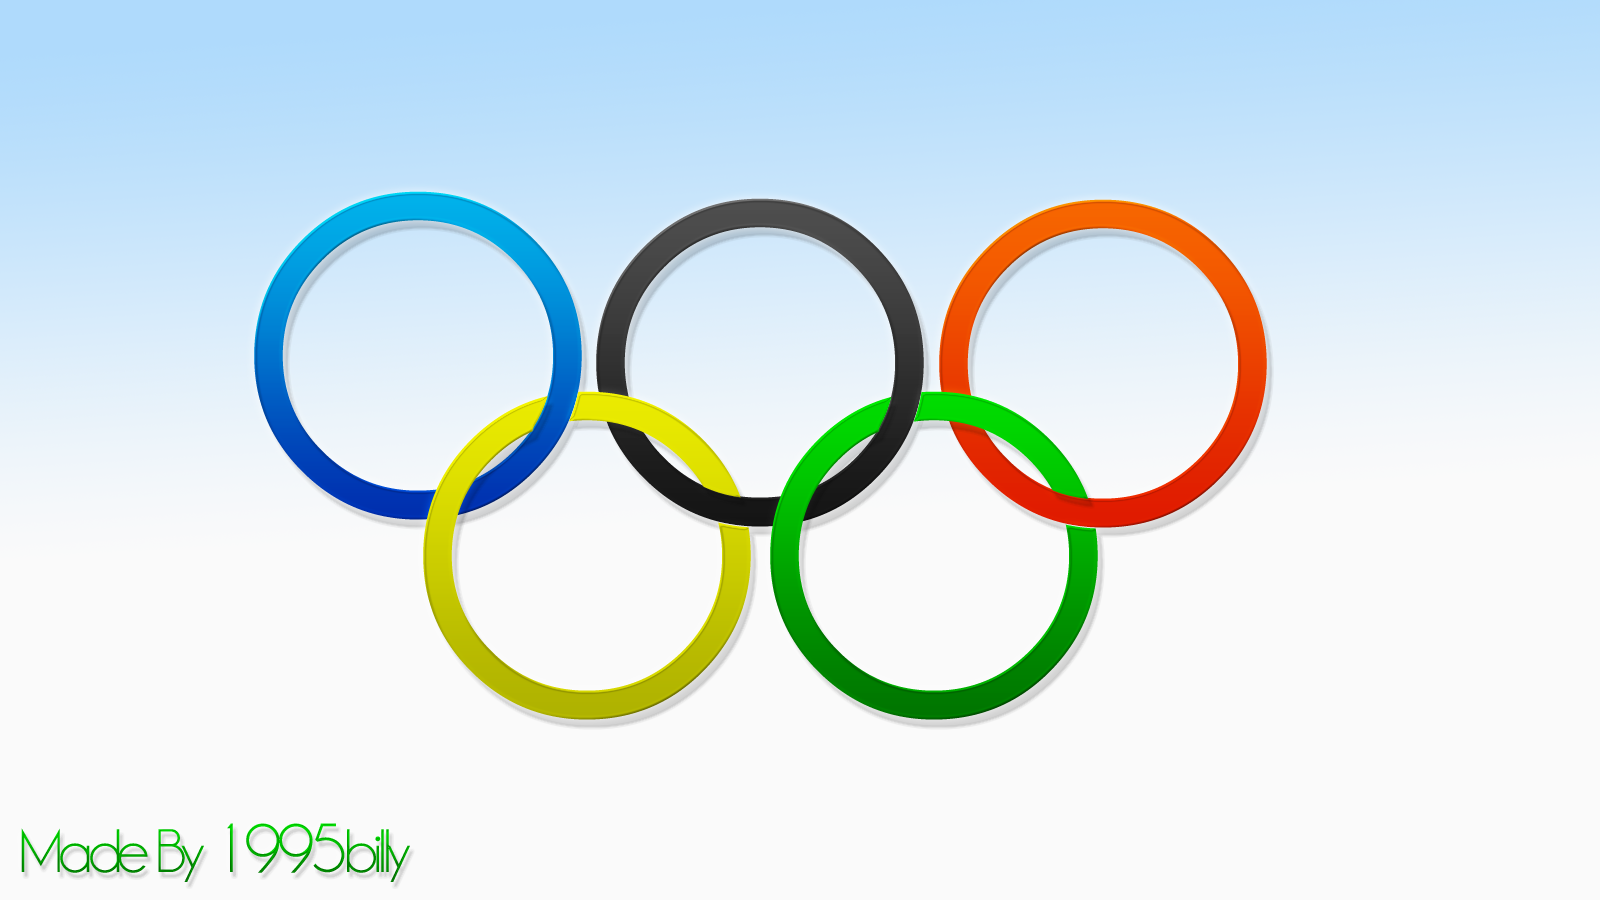 Olympic Ring's PSD by 1995billy on DeviantArt